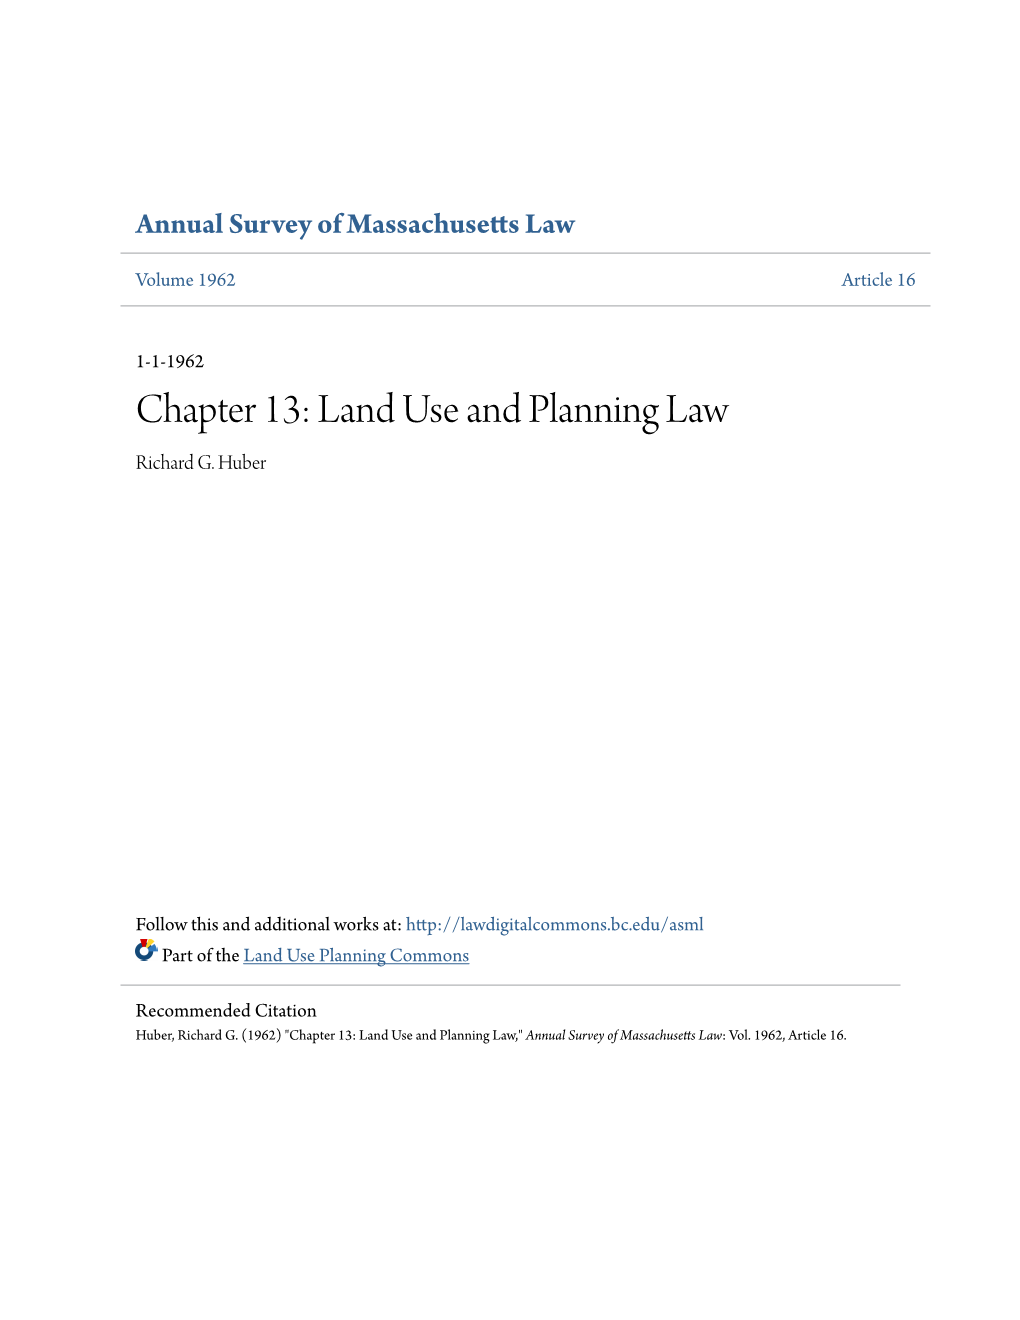 Land Use and Planning Law Richard G